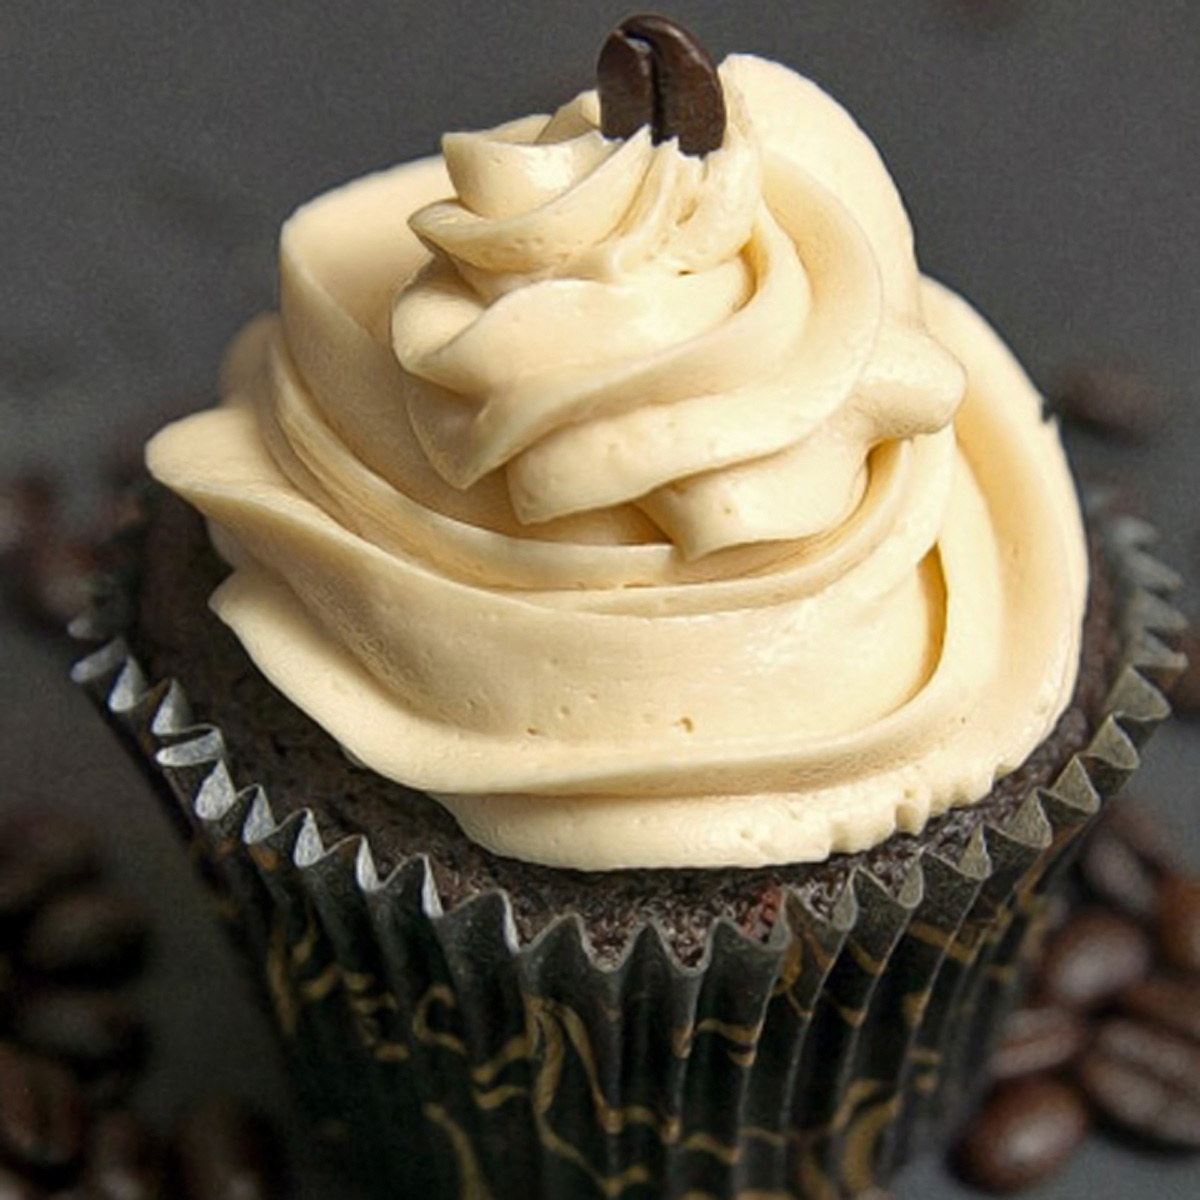 Chocolate cupcake with frosting on top.